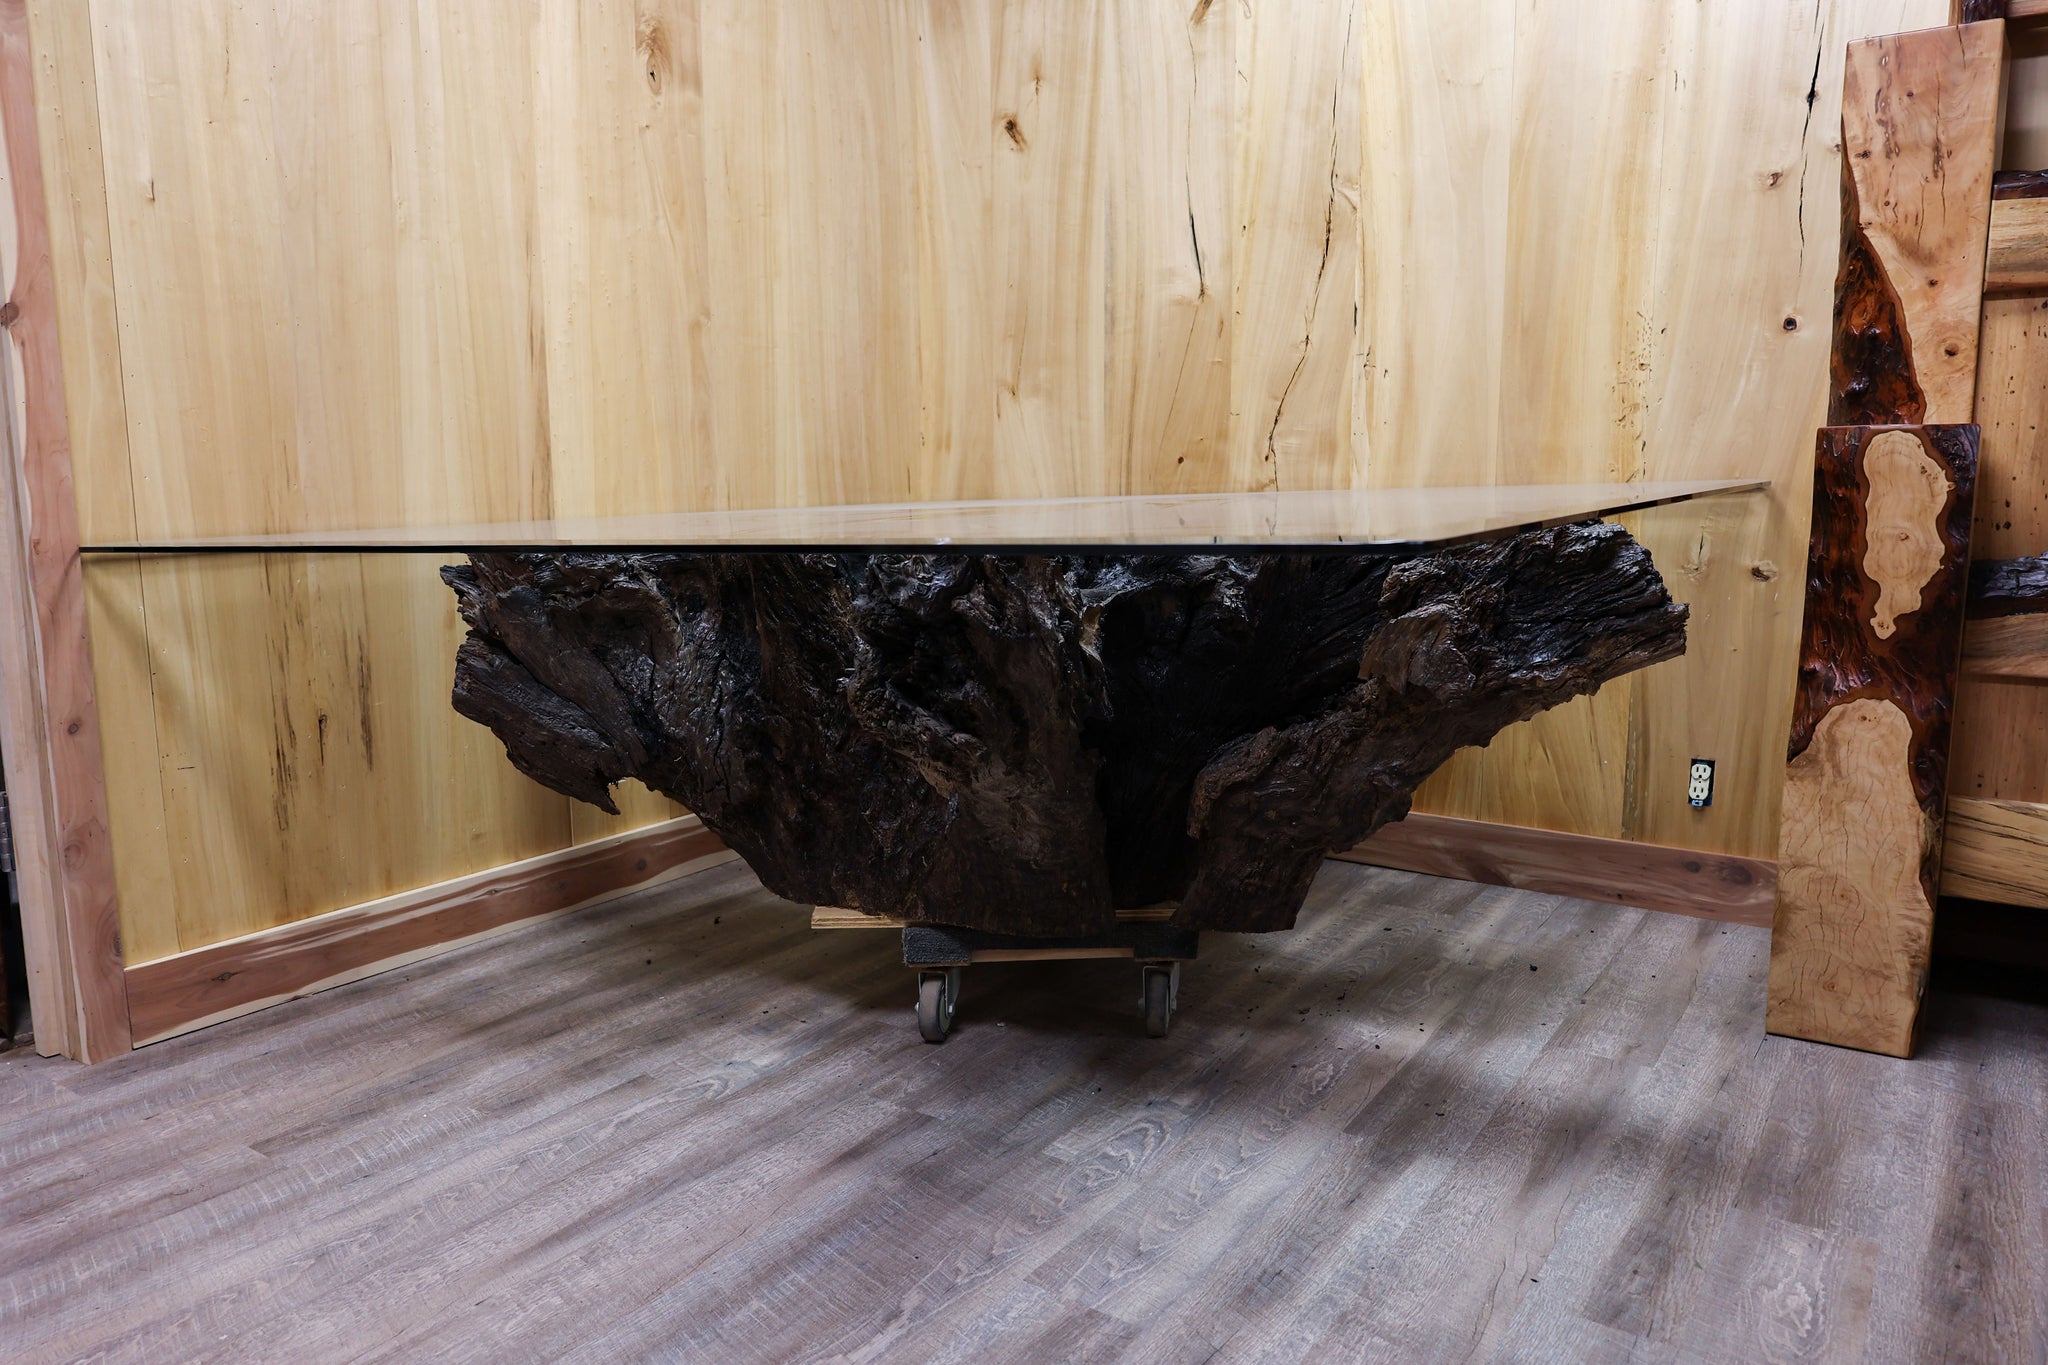 Square Glass Table with Root Bottom - #77